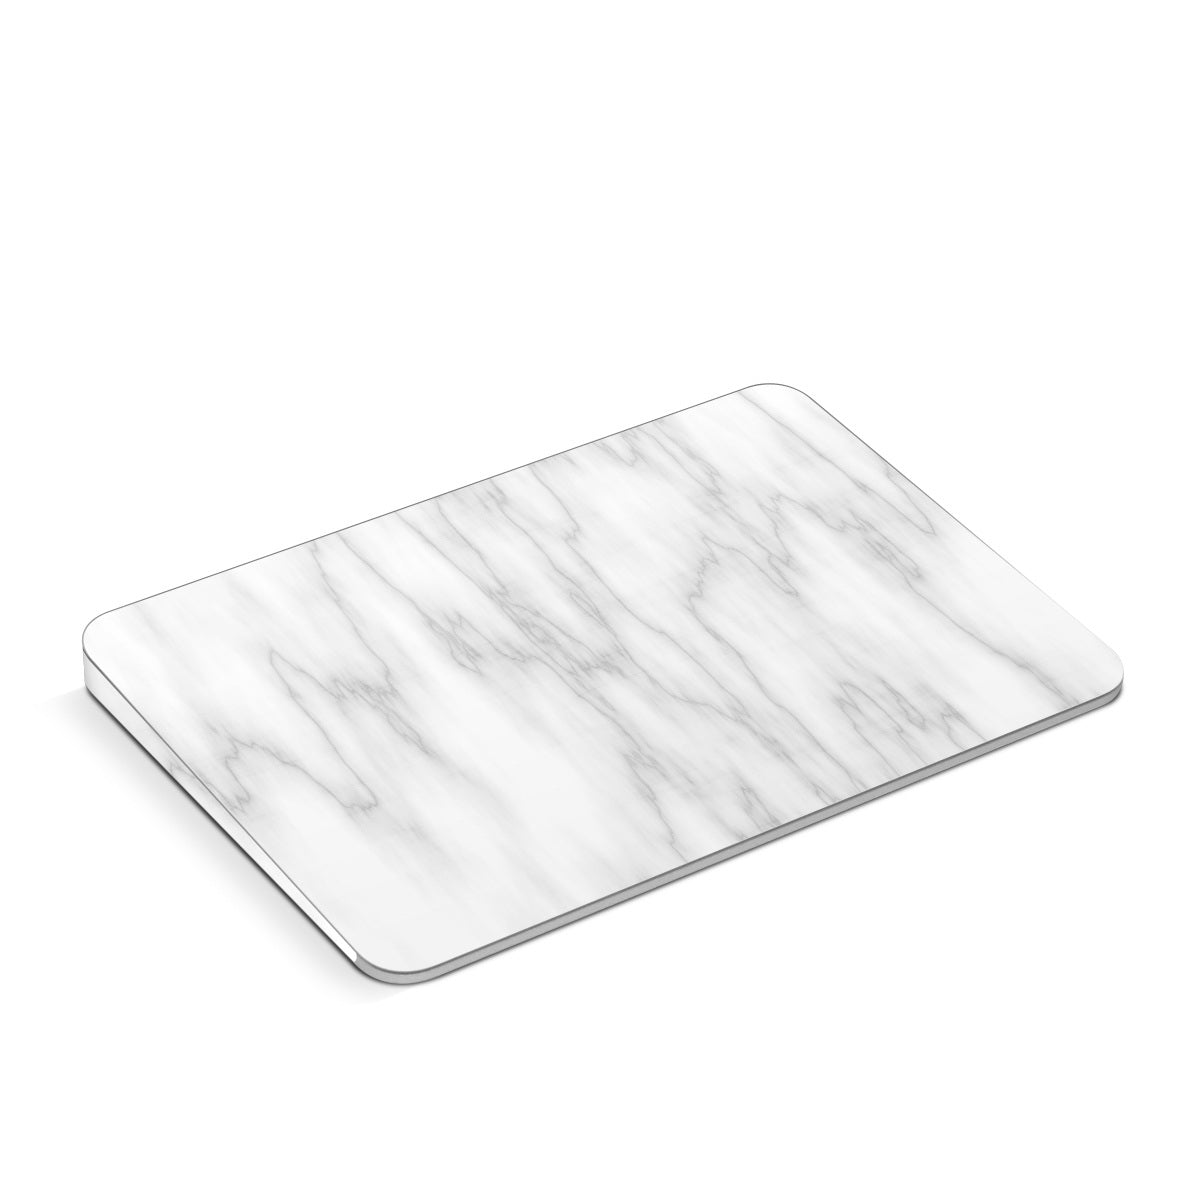 Bianco Marble - Apple Magic Trackpad Skin - Marble Collection - DecalGirl